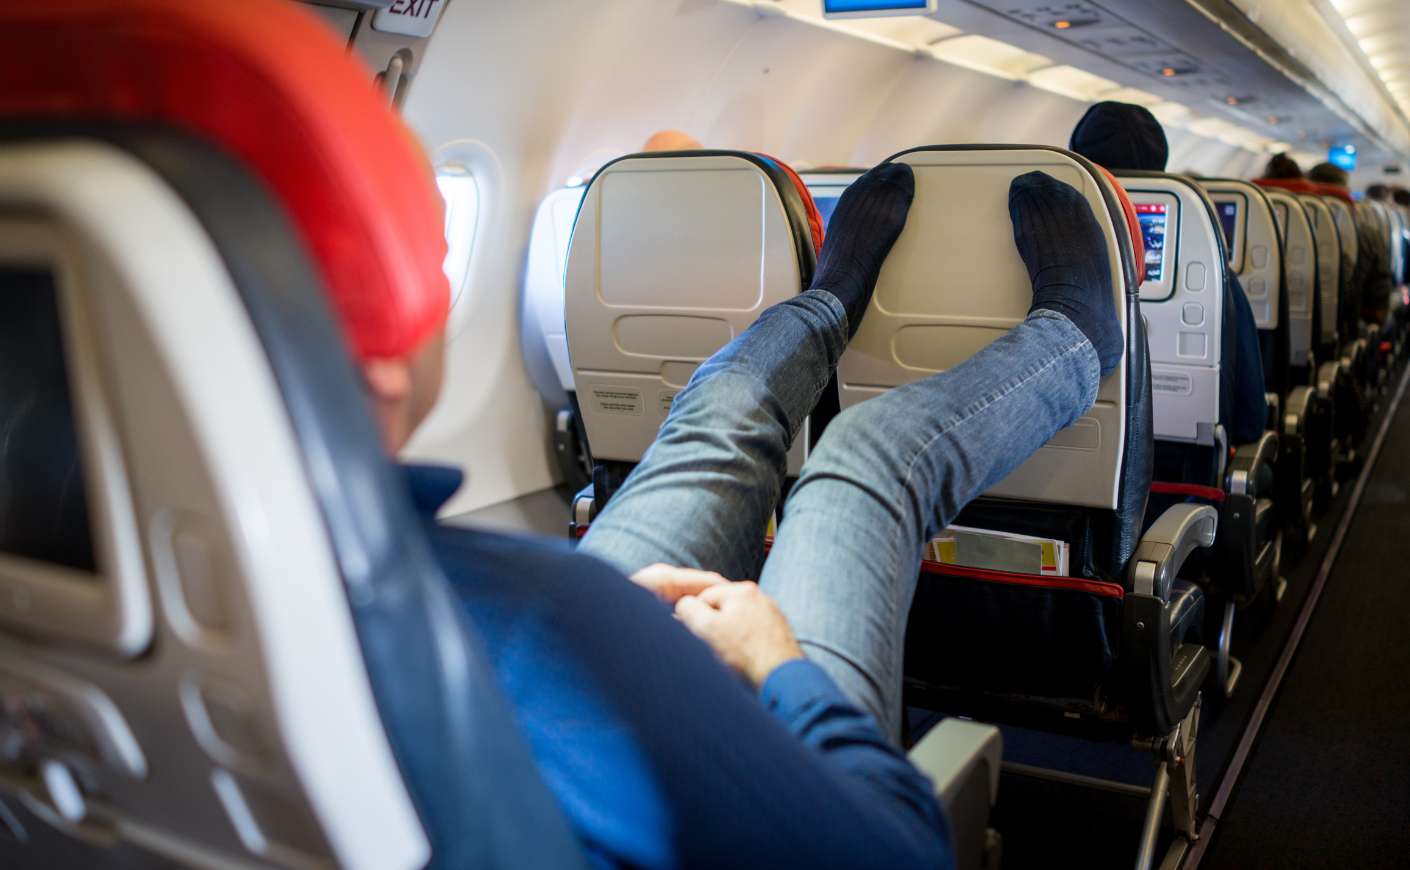 A man putting his feet on a plane headrest, with no shoes on